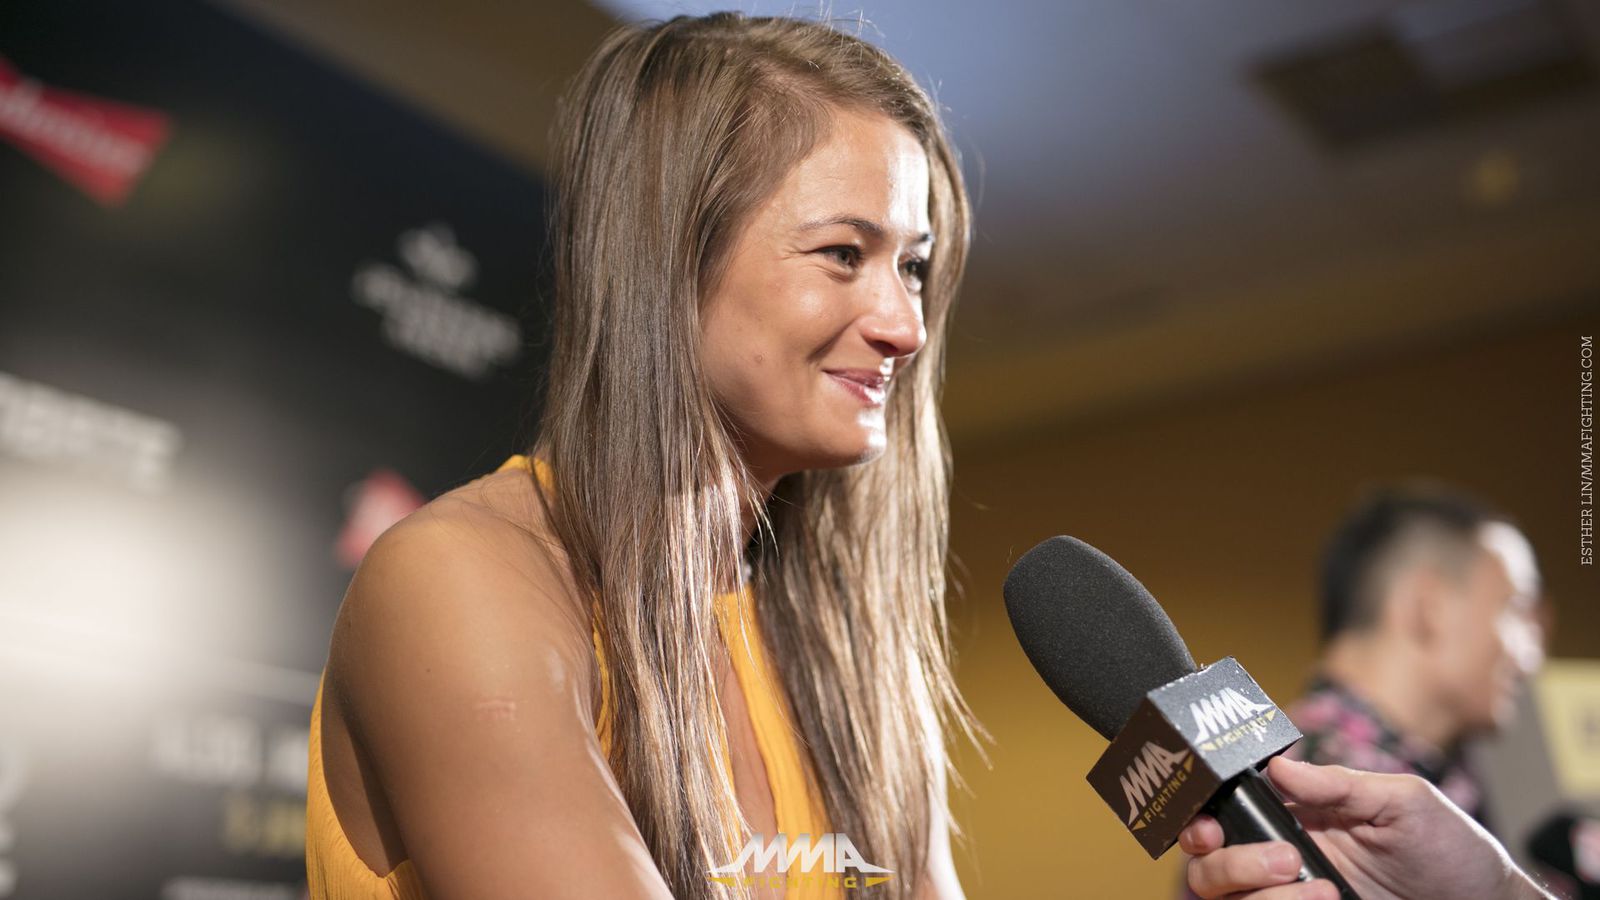 UFC: Karolina Kowalkiewicz reveals whether or not she will sue Conor McGregor for the Brooklyn attack - Conor McGregor